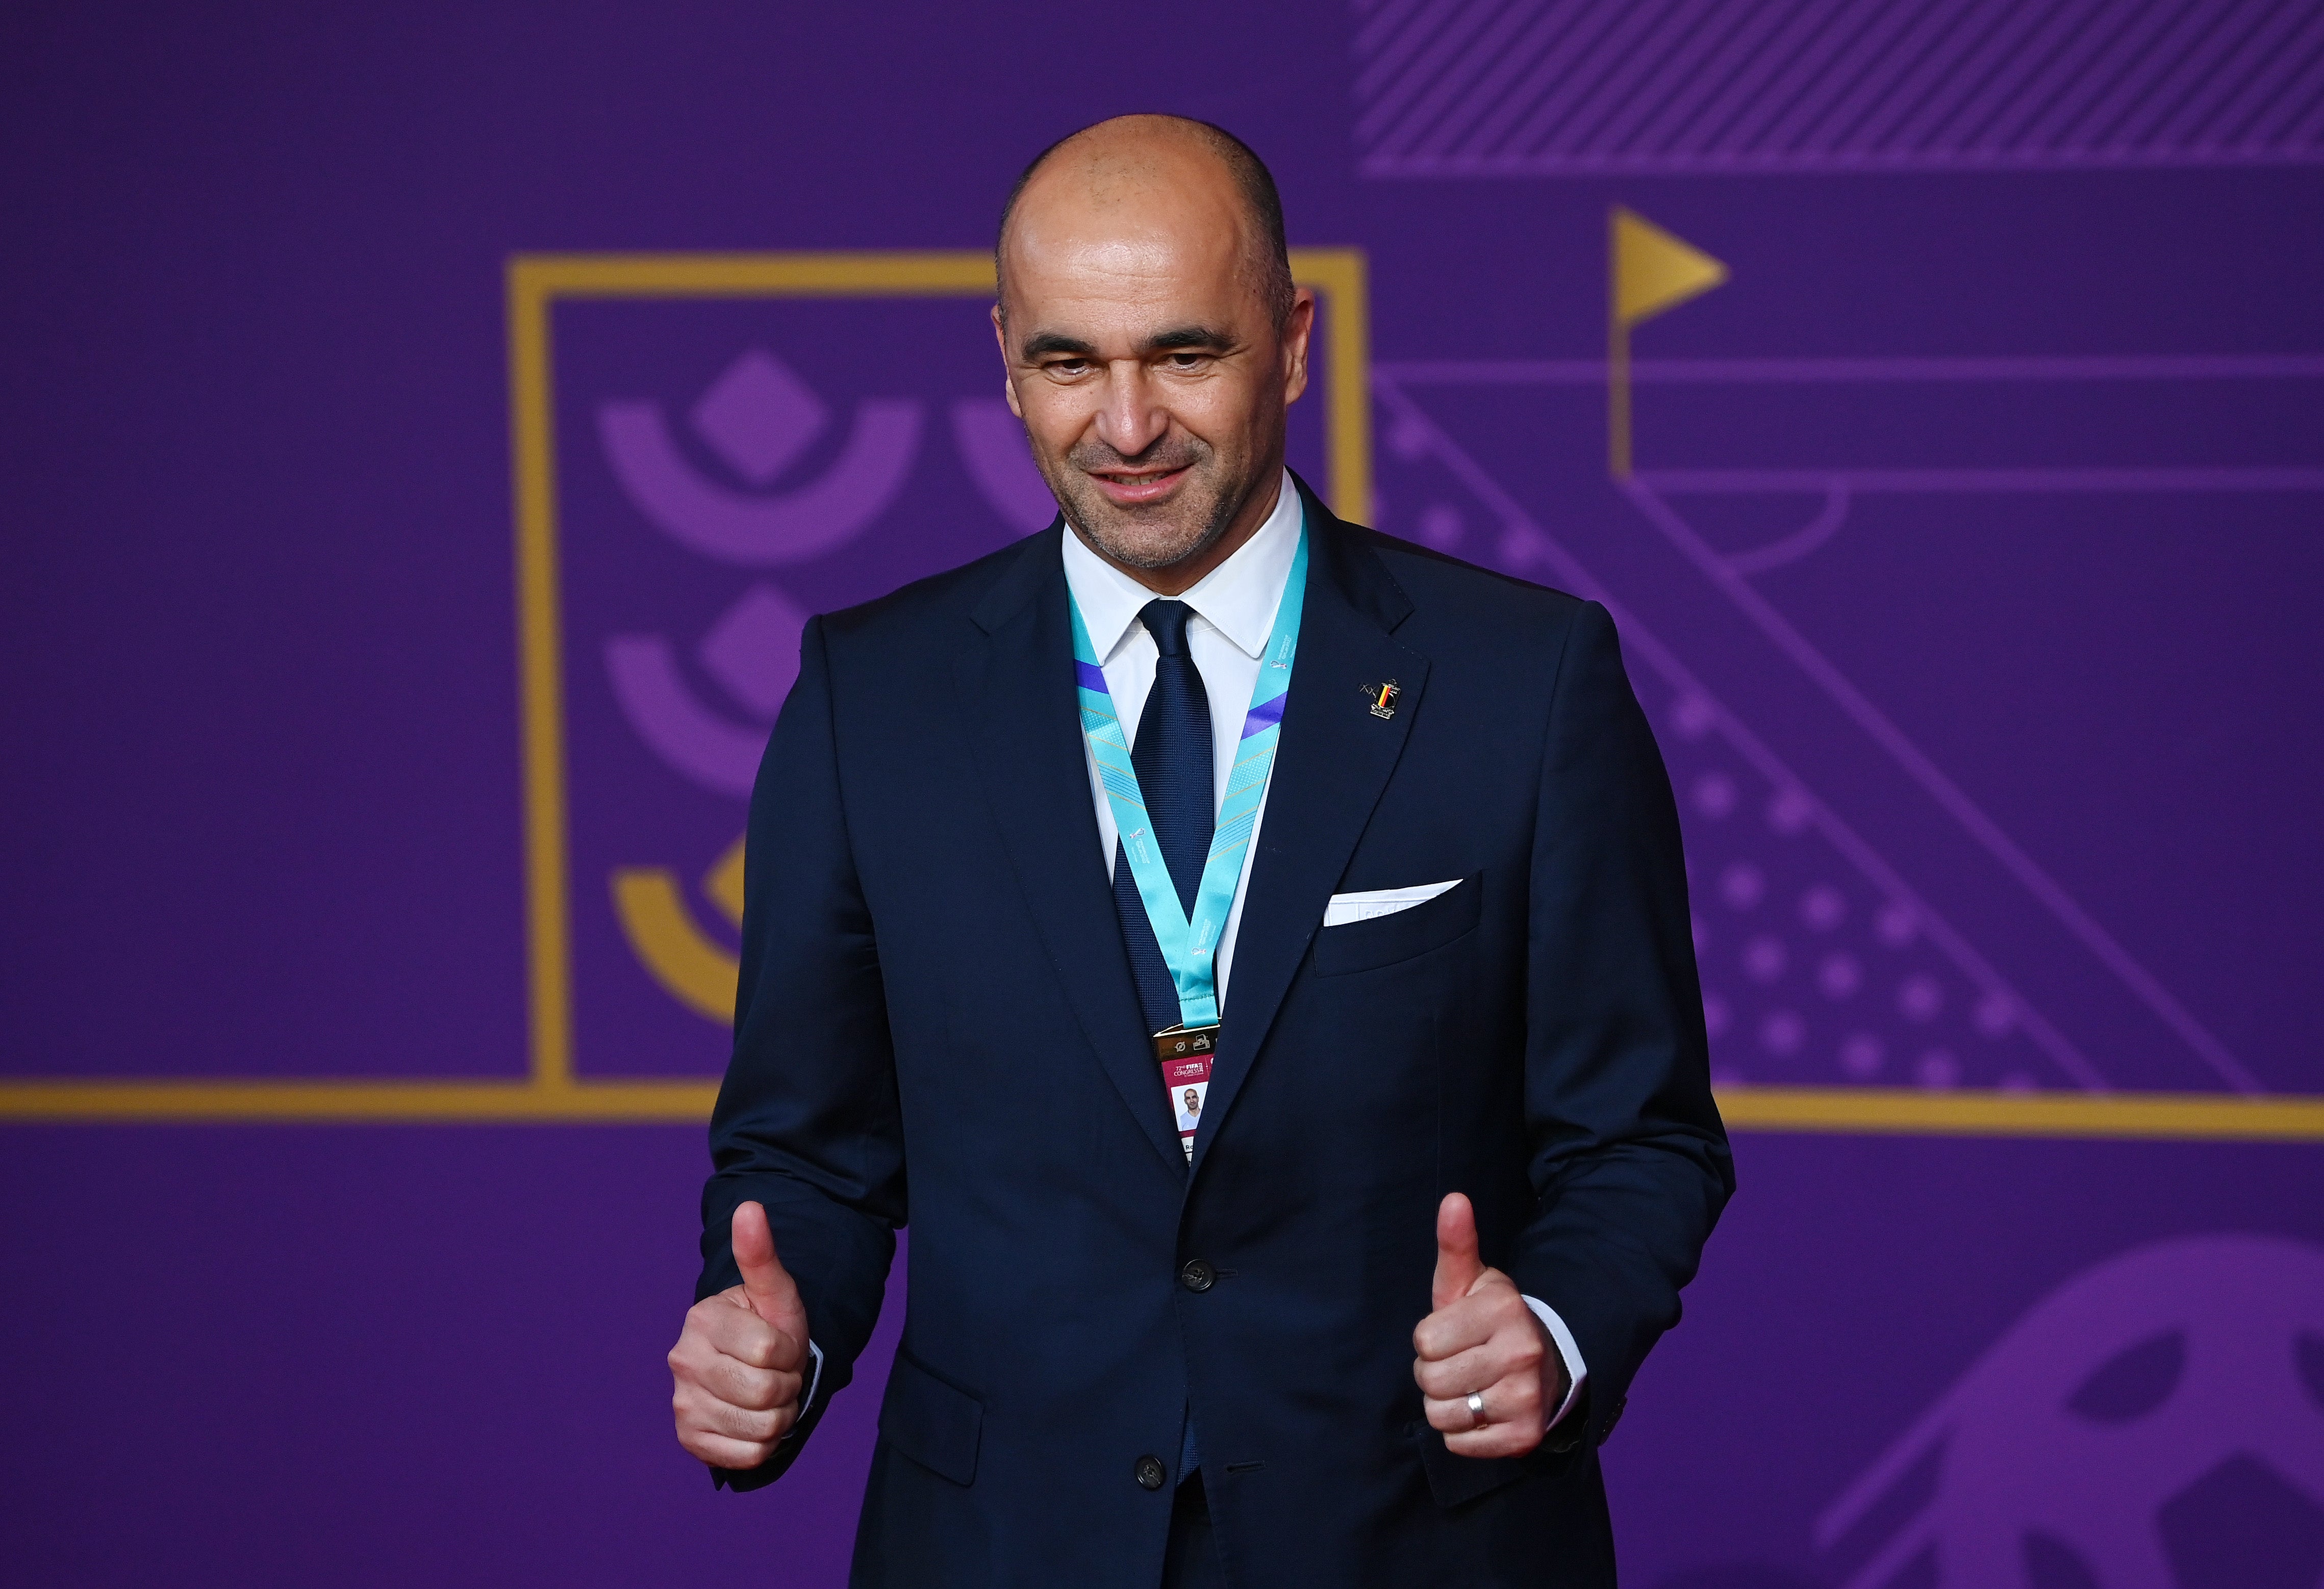 Roberto Martinez is trying to steer Belgium to World Cup glory